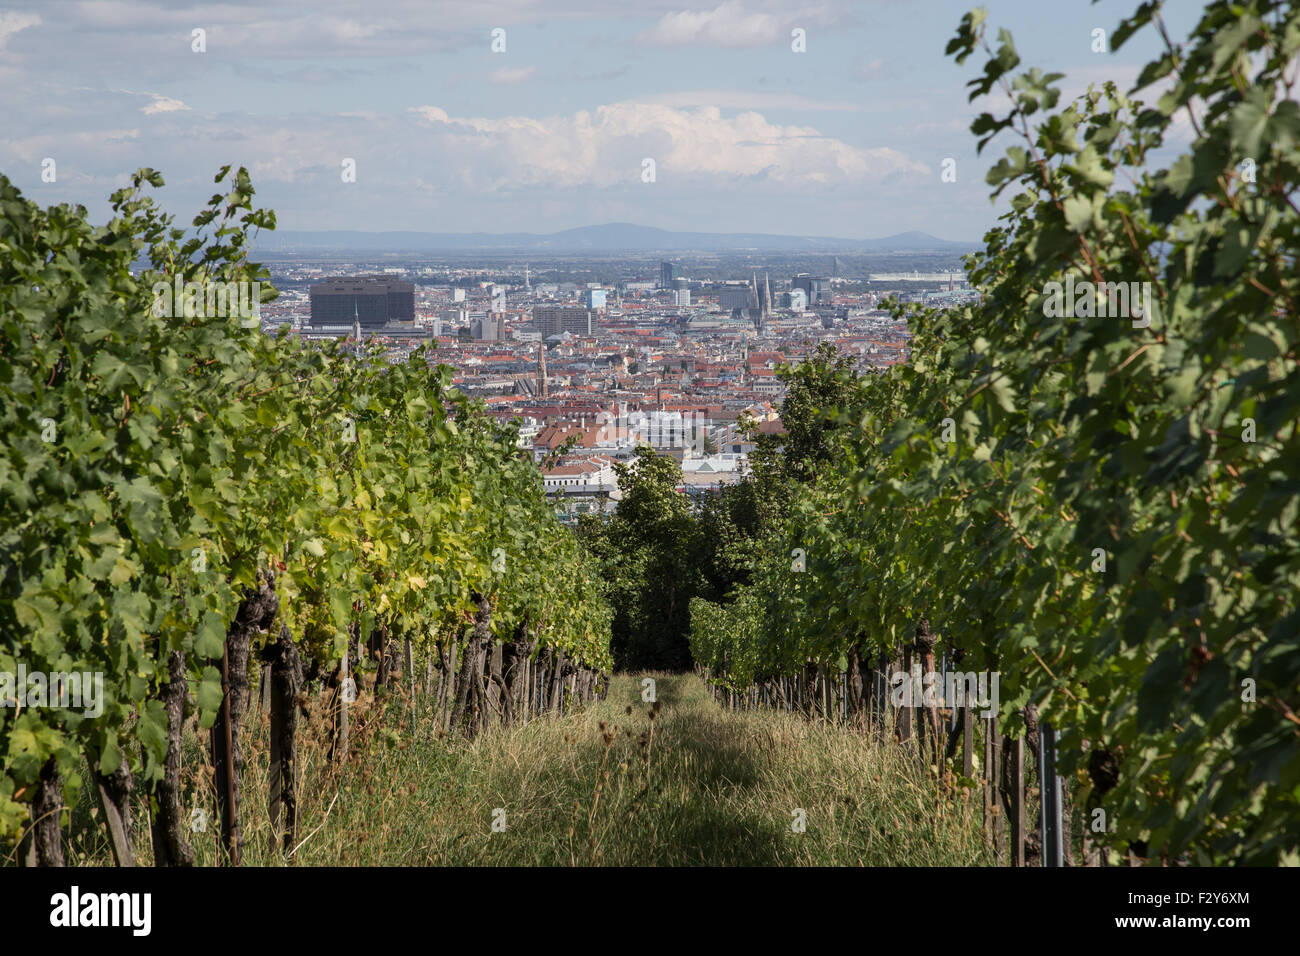 VIENNA, AUSTRIA - 6TH SEPTEMBER 2015: A view of part of the Vienna Skyline and Grape Vine Plantations during the day. Stock Photo